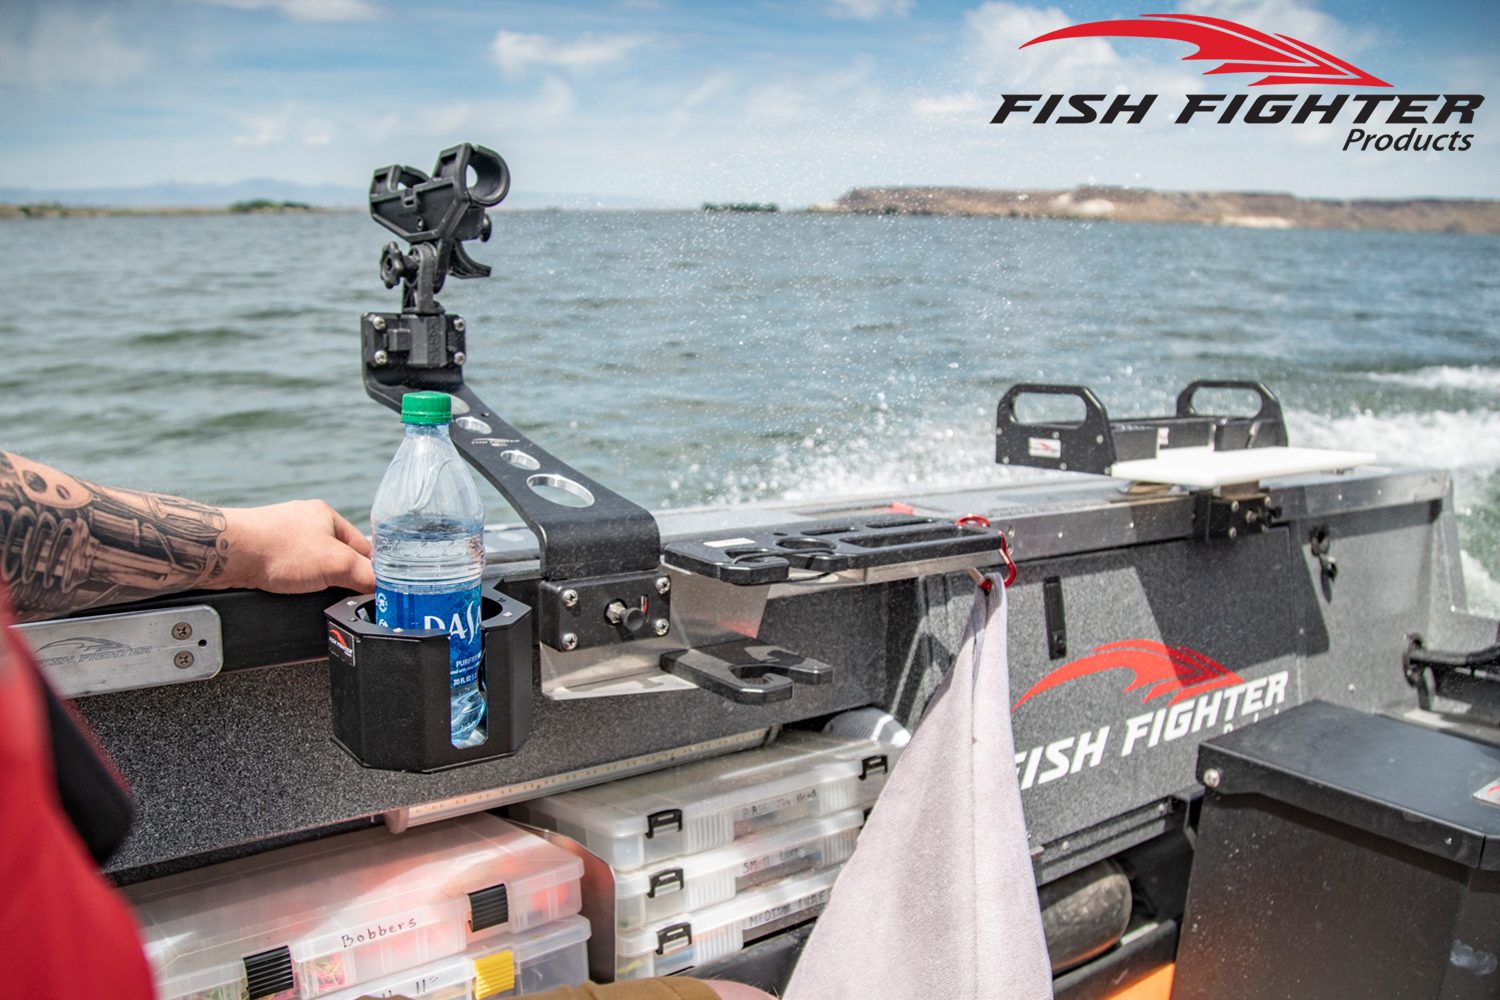 S&C Rod Racks - Fish Fighter® Products